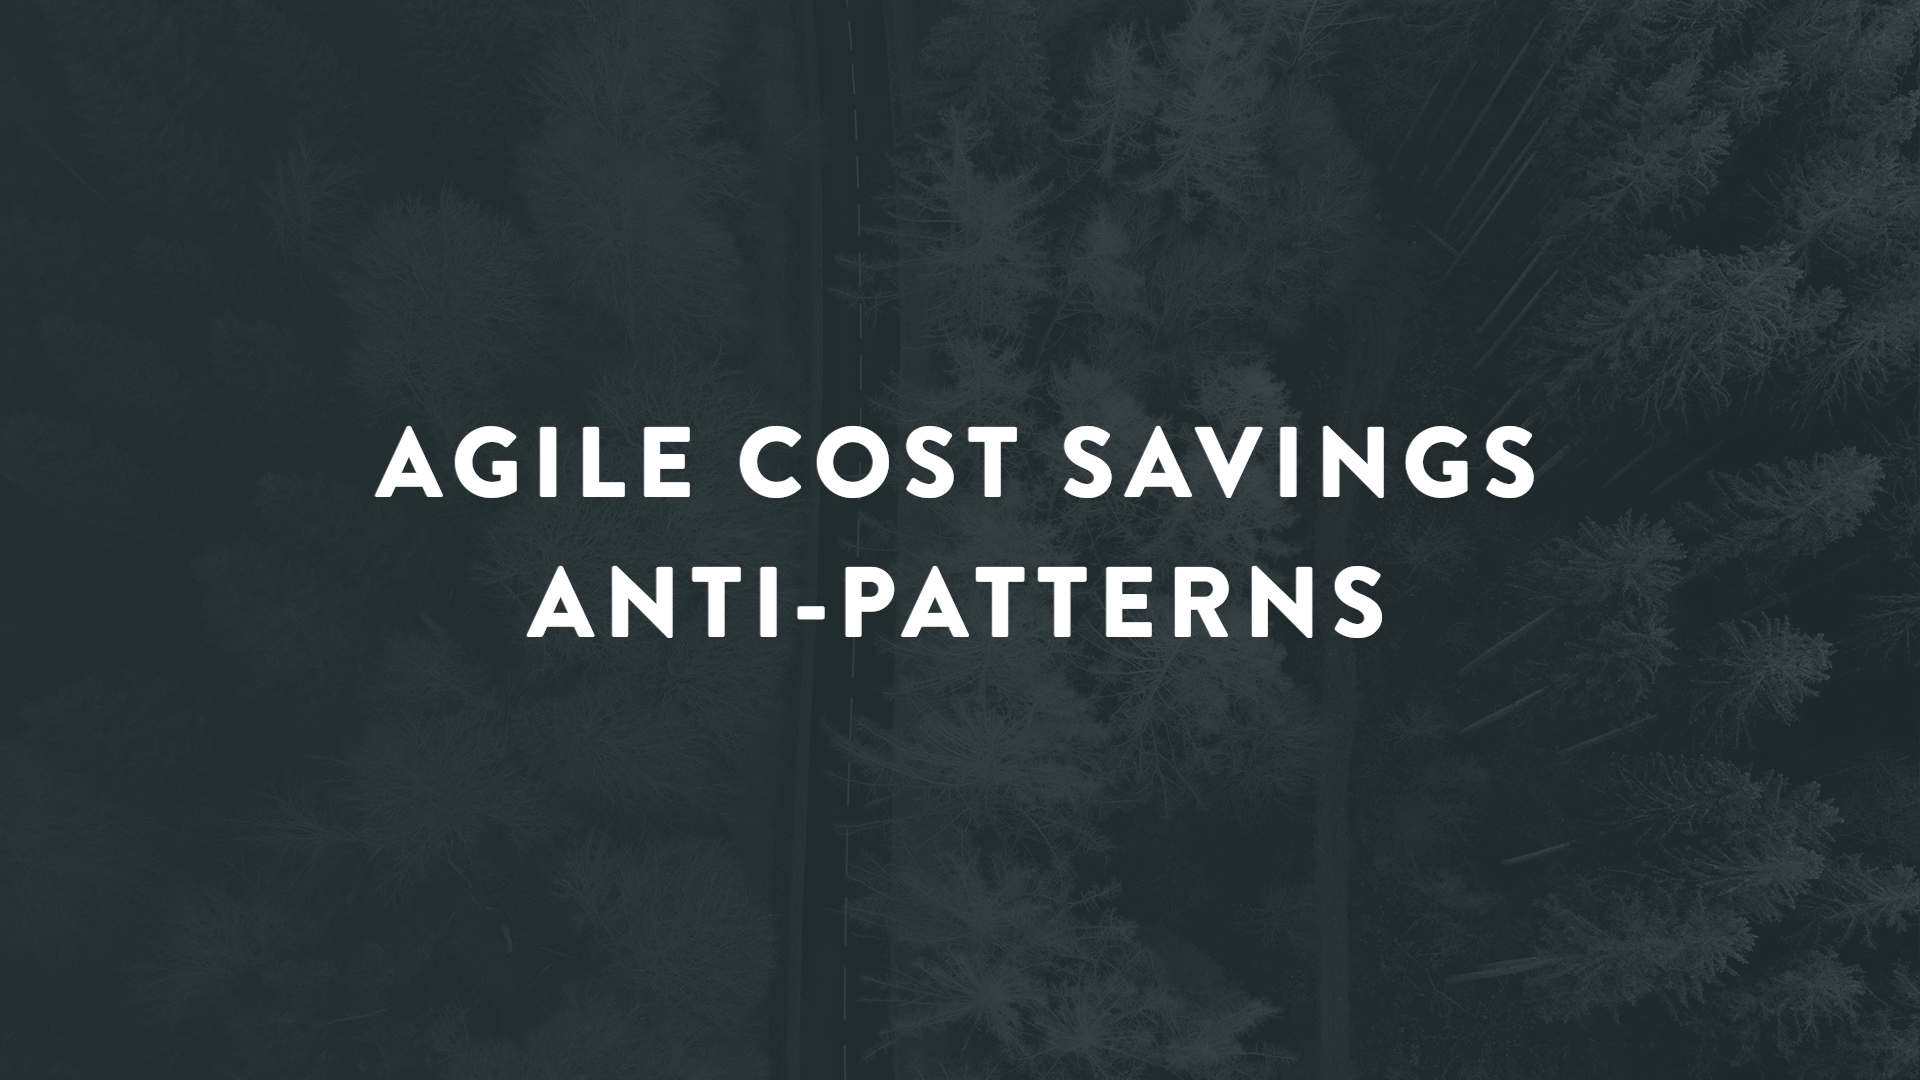 The Right Way to Think About Cost Savings with Agile